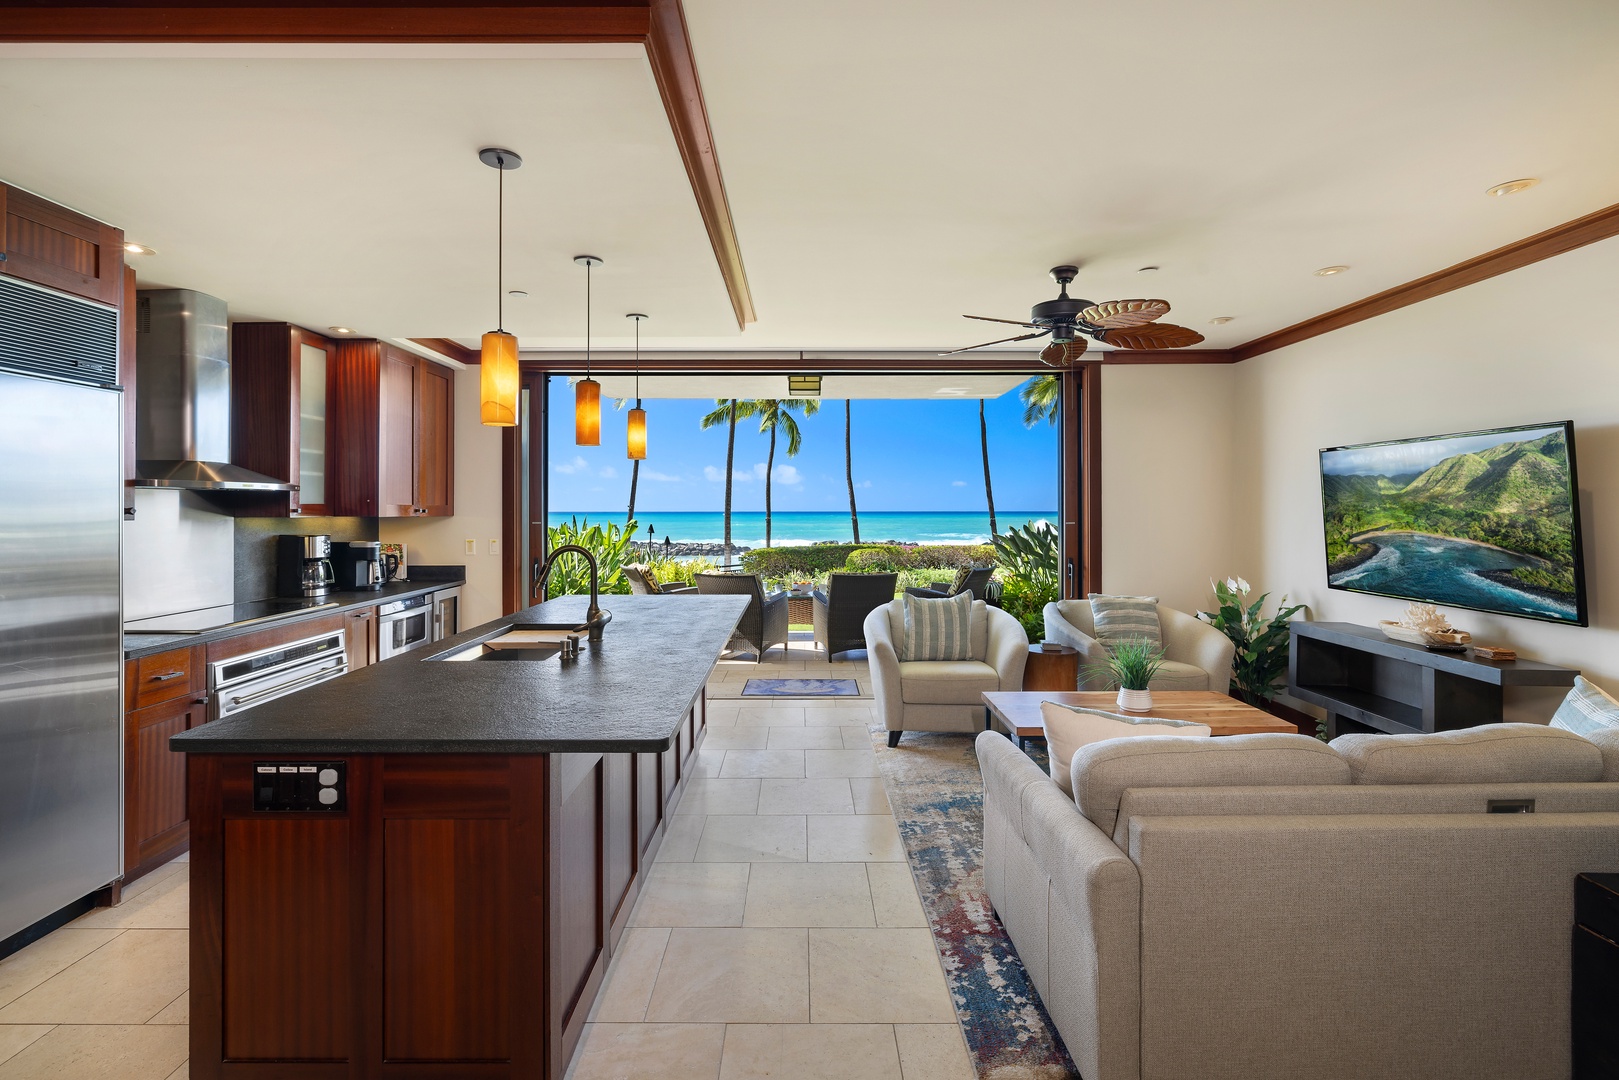 Kapolei Vacation Rentals, Ko Olina Beach Villas B109 - 1.Tall ceilings and open concept design blends living, dining and kitchen areas.